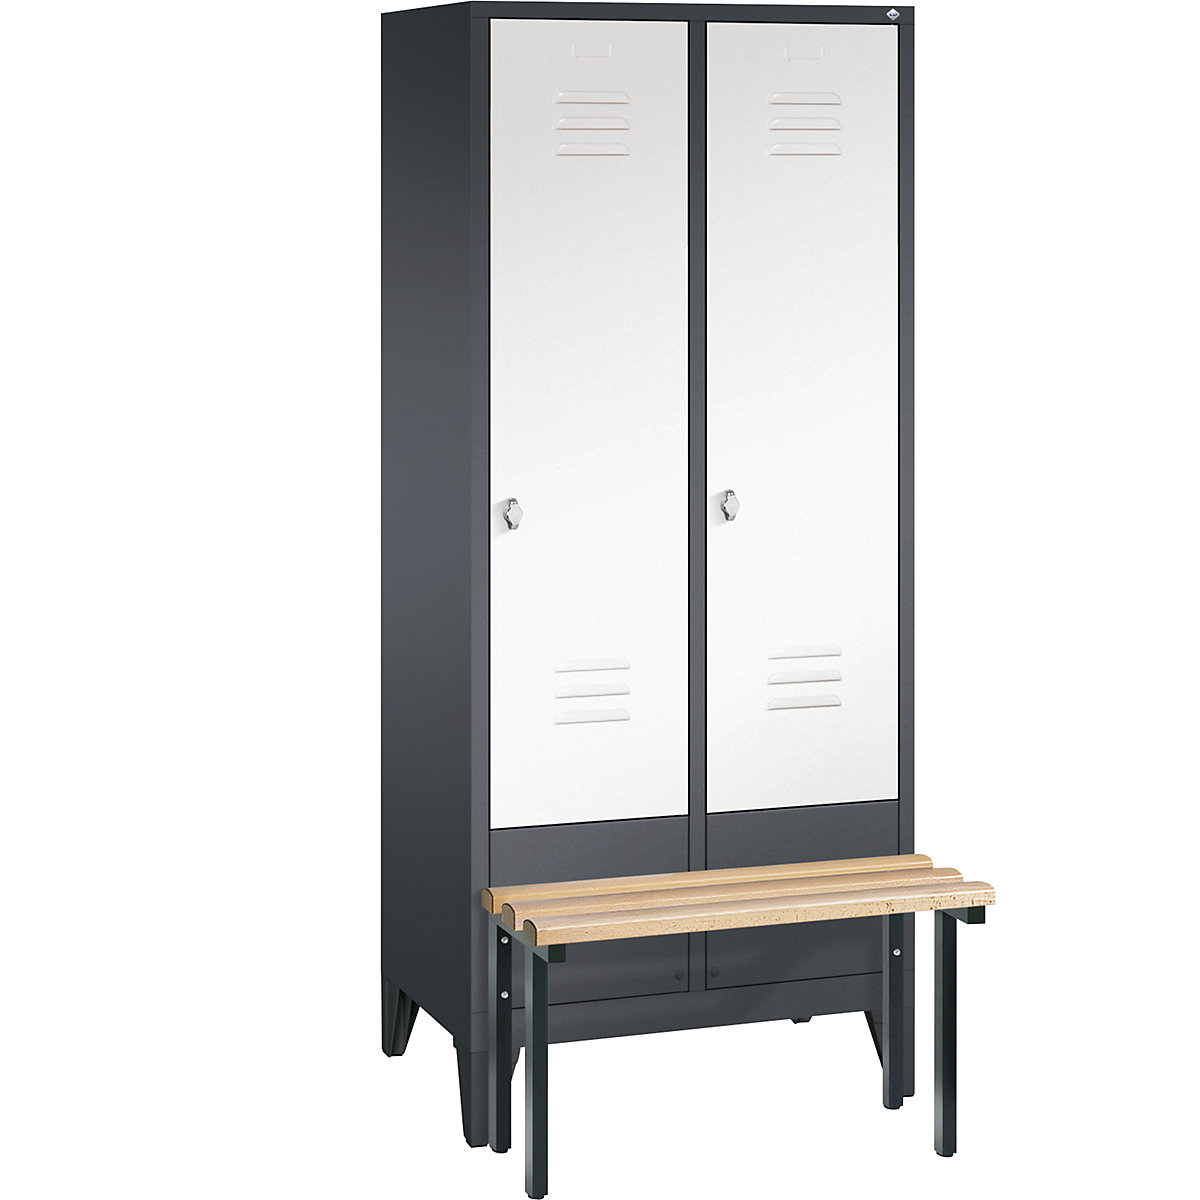 CLASSIC cloakroom locker with bench mounted in front – C+P, 2 compartments, compartment width 400 mm, black grey / traffic white-11